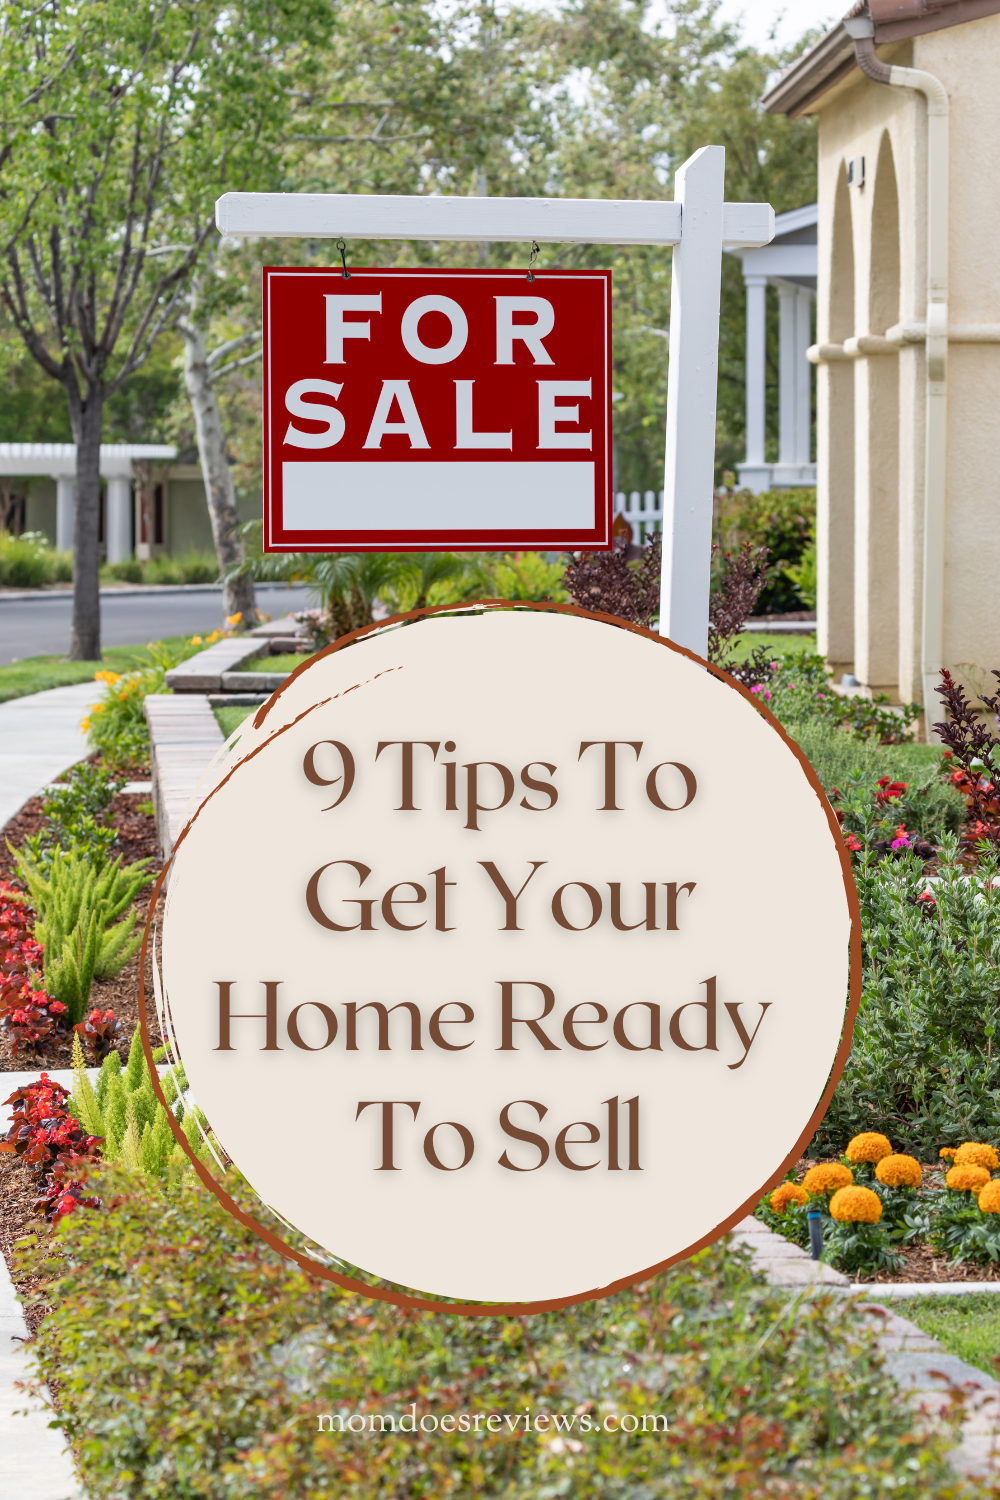 9 Tips To Get Your Home Ready To Sell